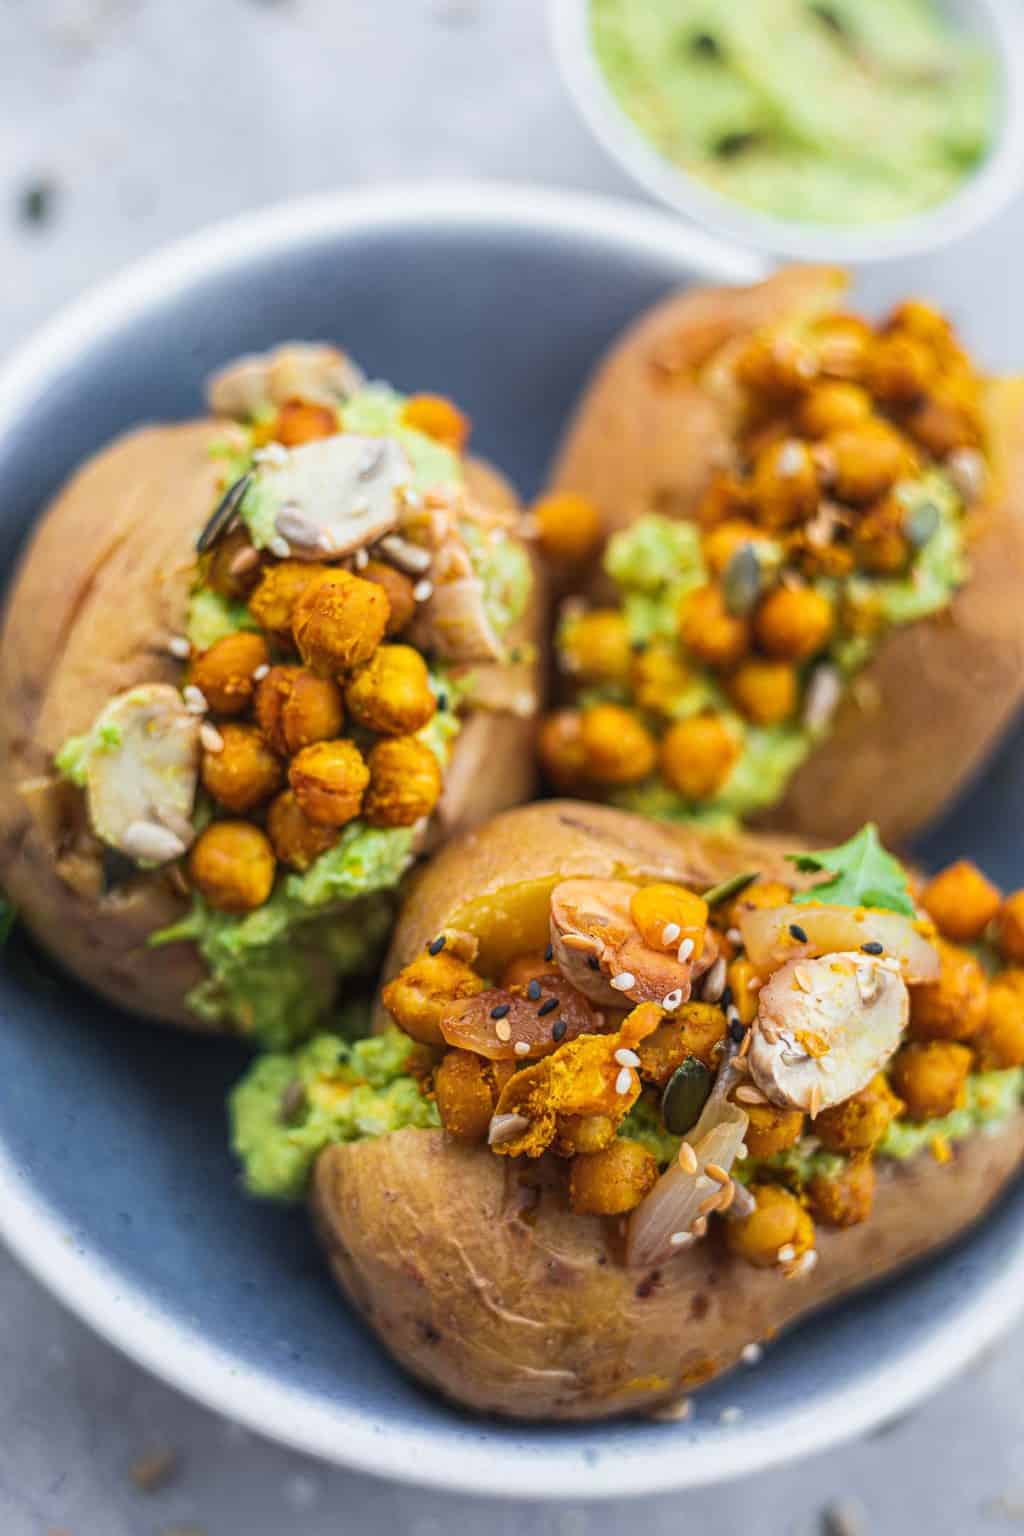 Bowl of potatoes stuffed with chickpeas and avocado